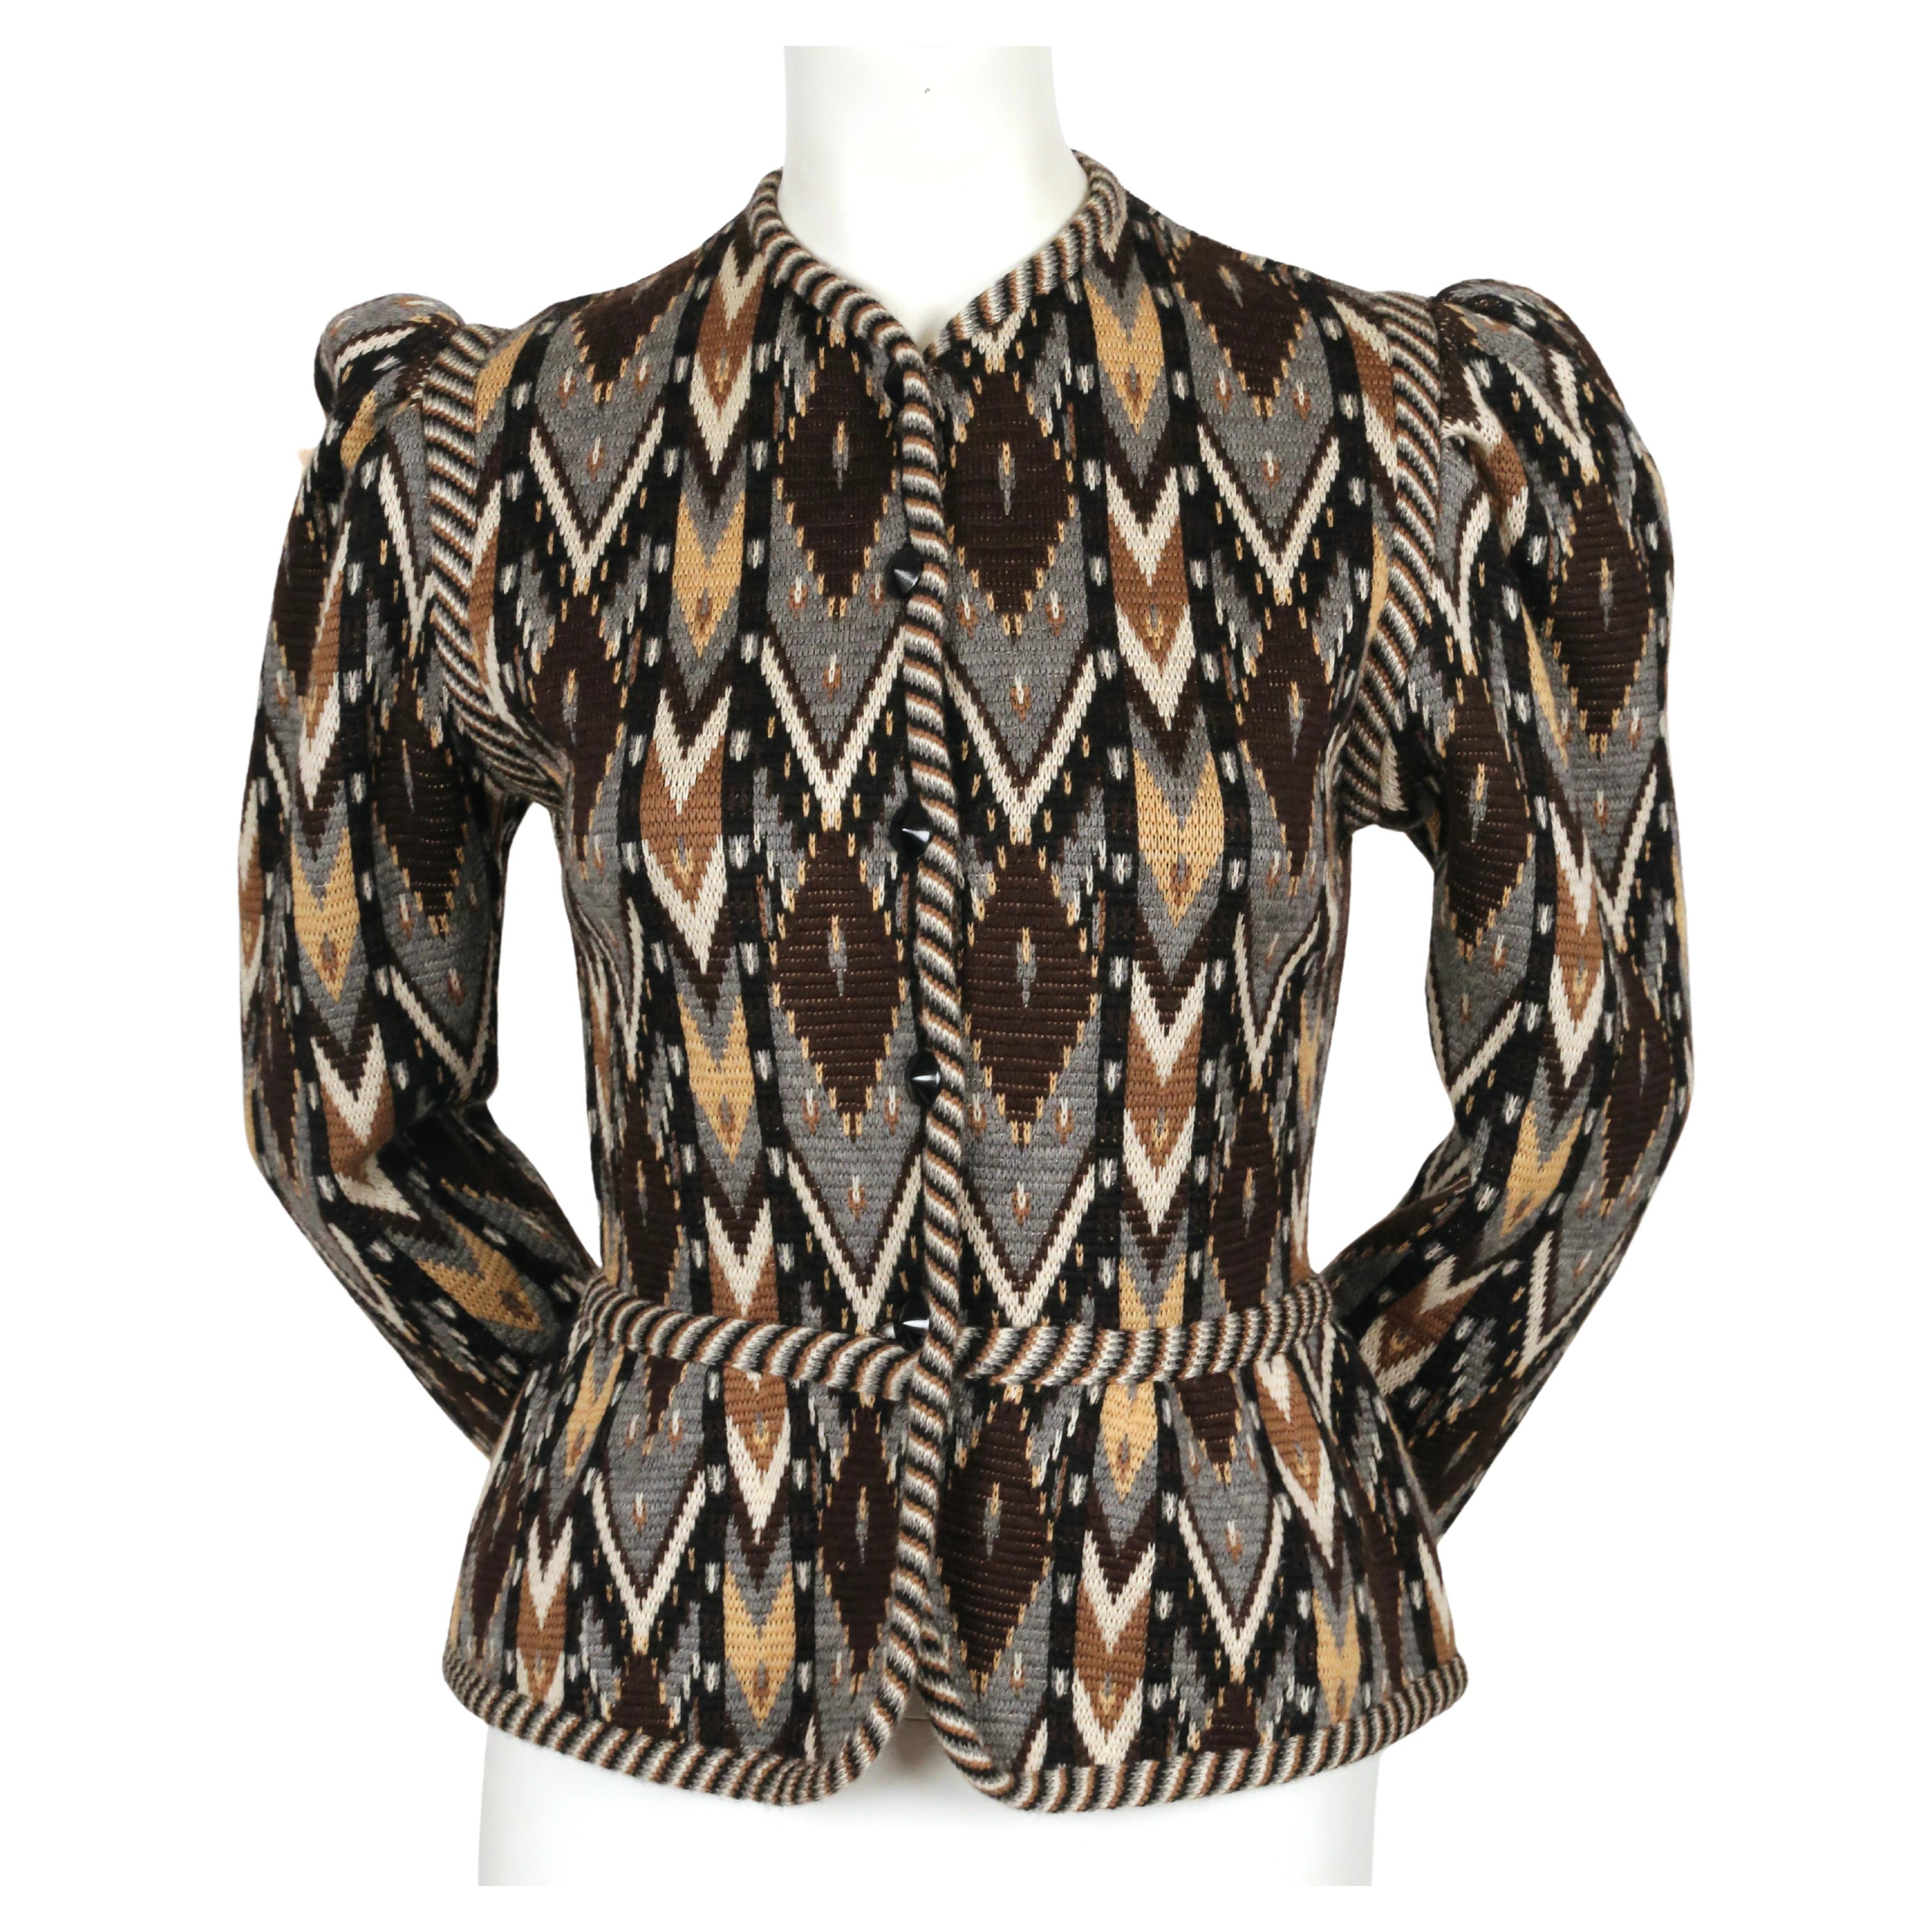 Multi-colored, Ikat patterned, woven wool cardigan with puff sleeves and peplum hem detail designed by Yves Saint Laurent dating to fall of 1979. Rare brown, grey, tan, off-white and black colorway. Labeled a French size 38. Approximate measurements